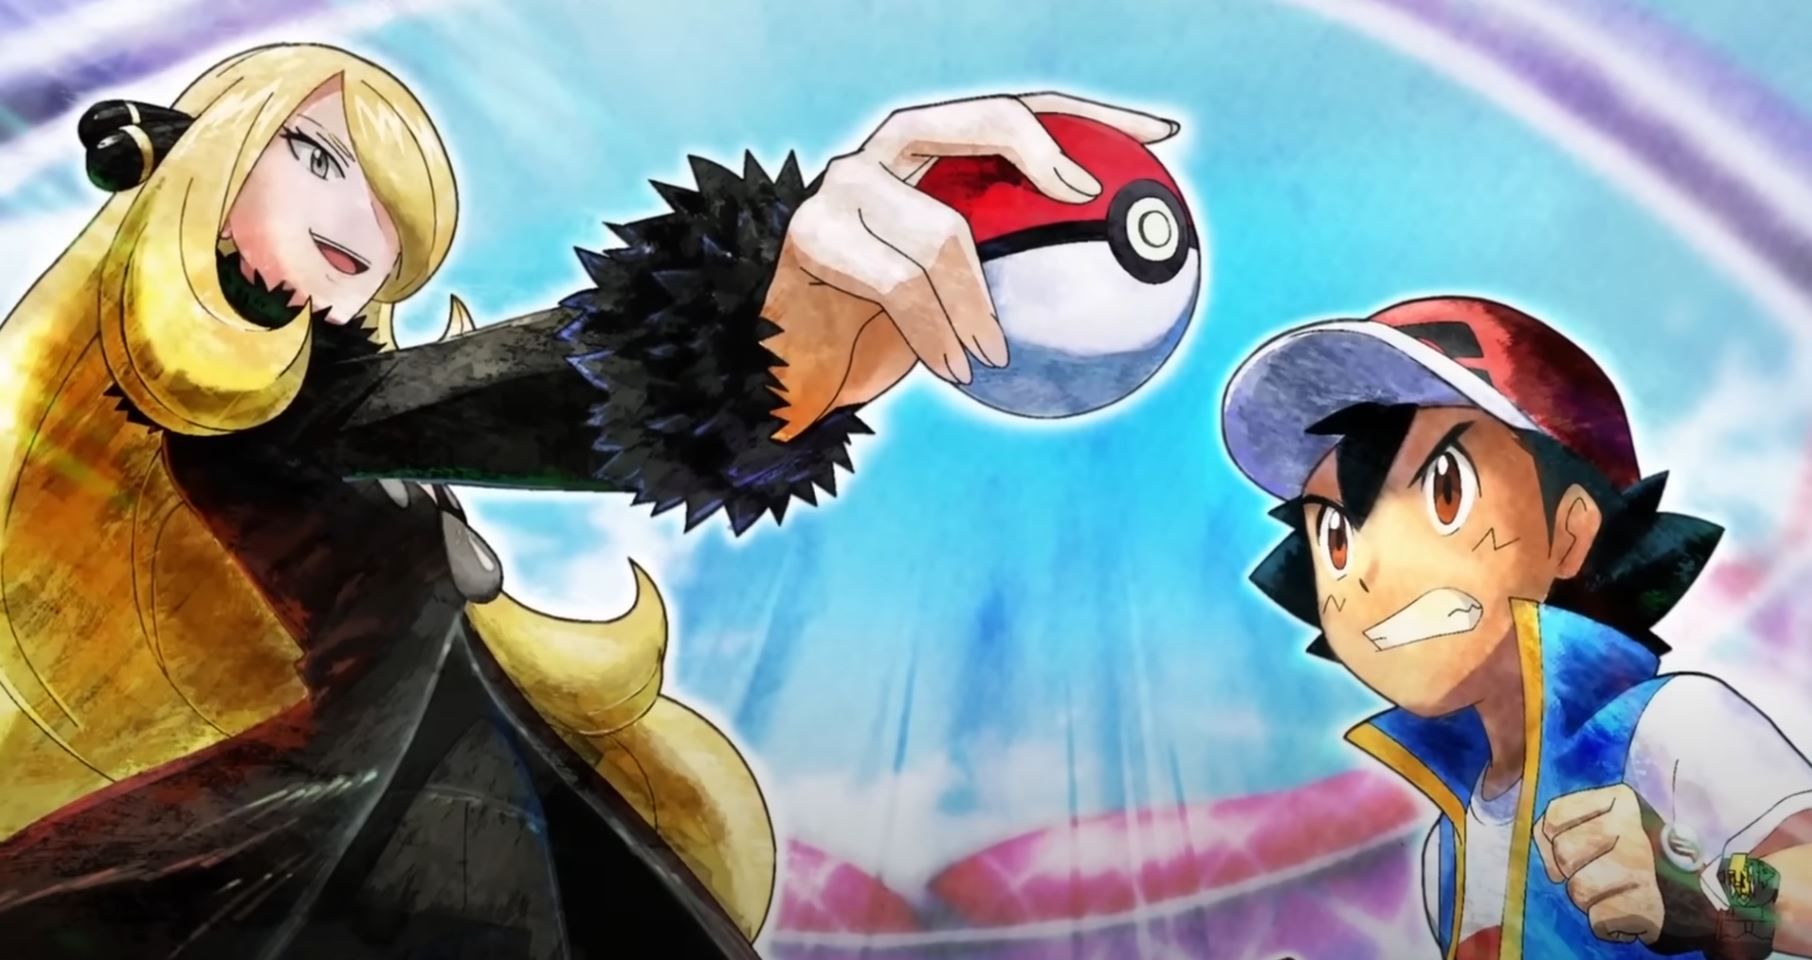 What is super effective against Cynthia's Spiritomb?